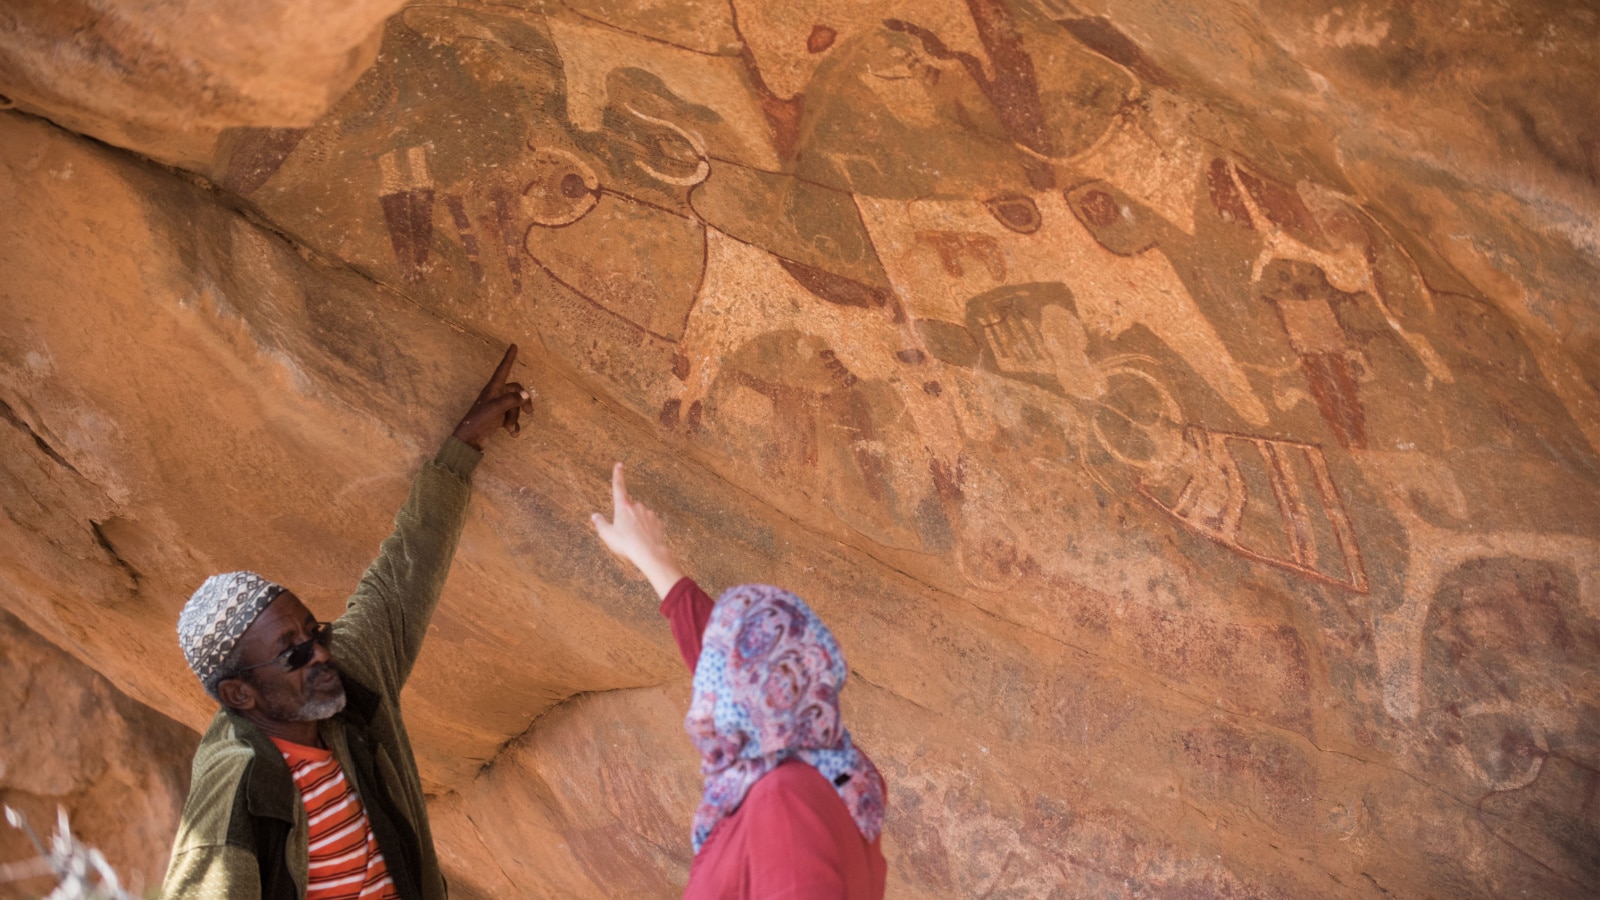 HARGEISA, SOMALILAND - 13 JANUARY 2016: a guide shows a tourist to her amazement the place in a cave wall of Las Geel where giraffes are depicted. Nowadays giraffes do not longer inhabit this area.